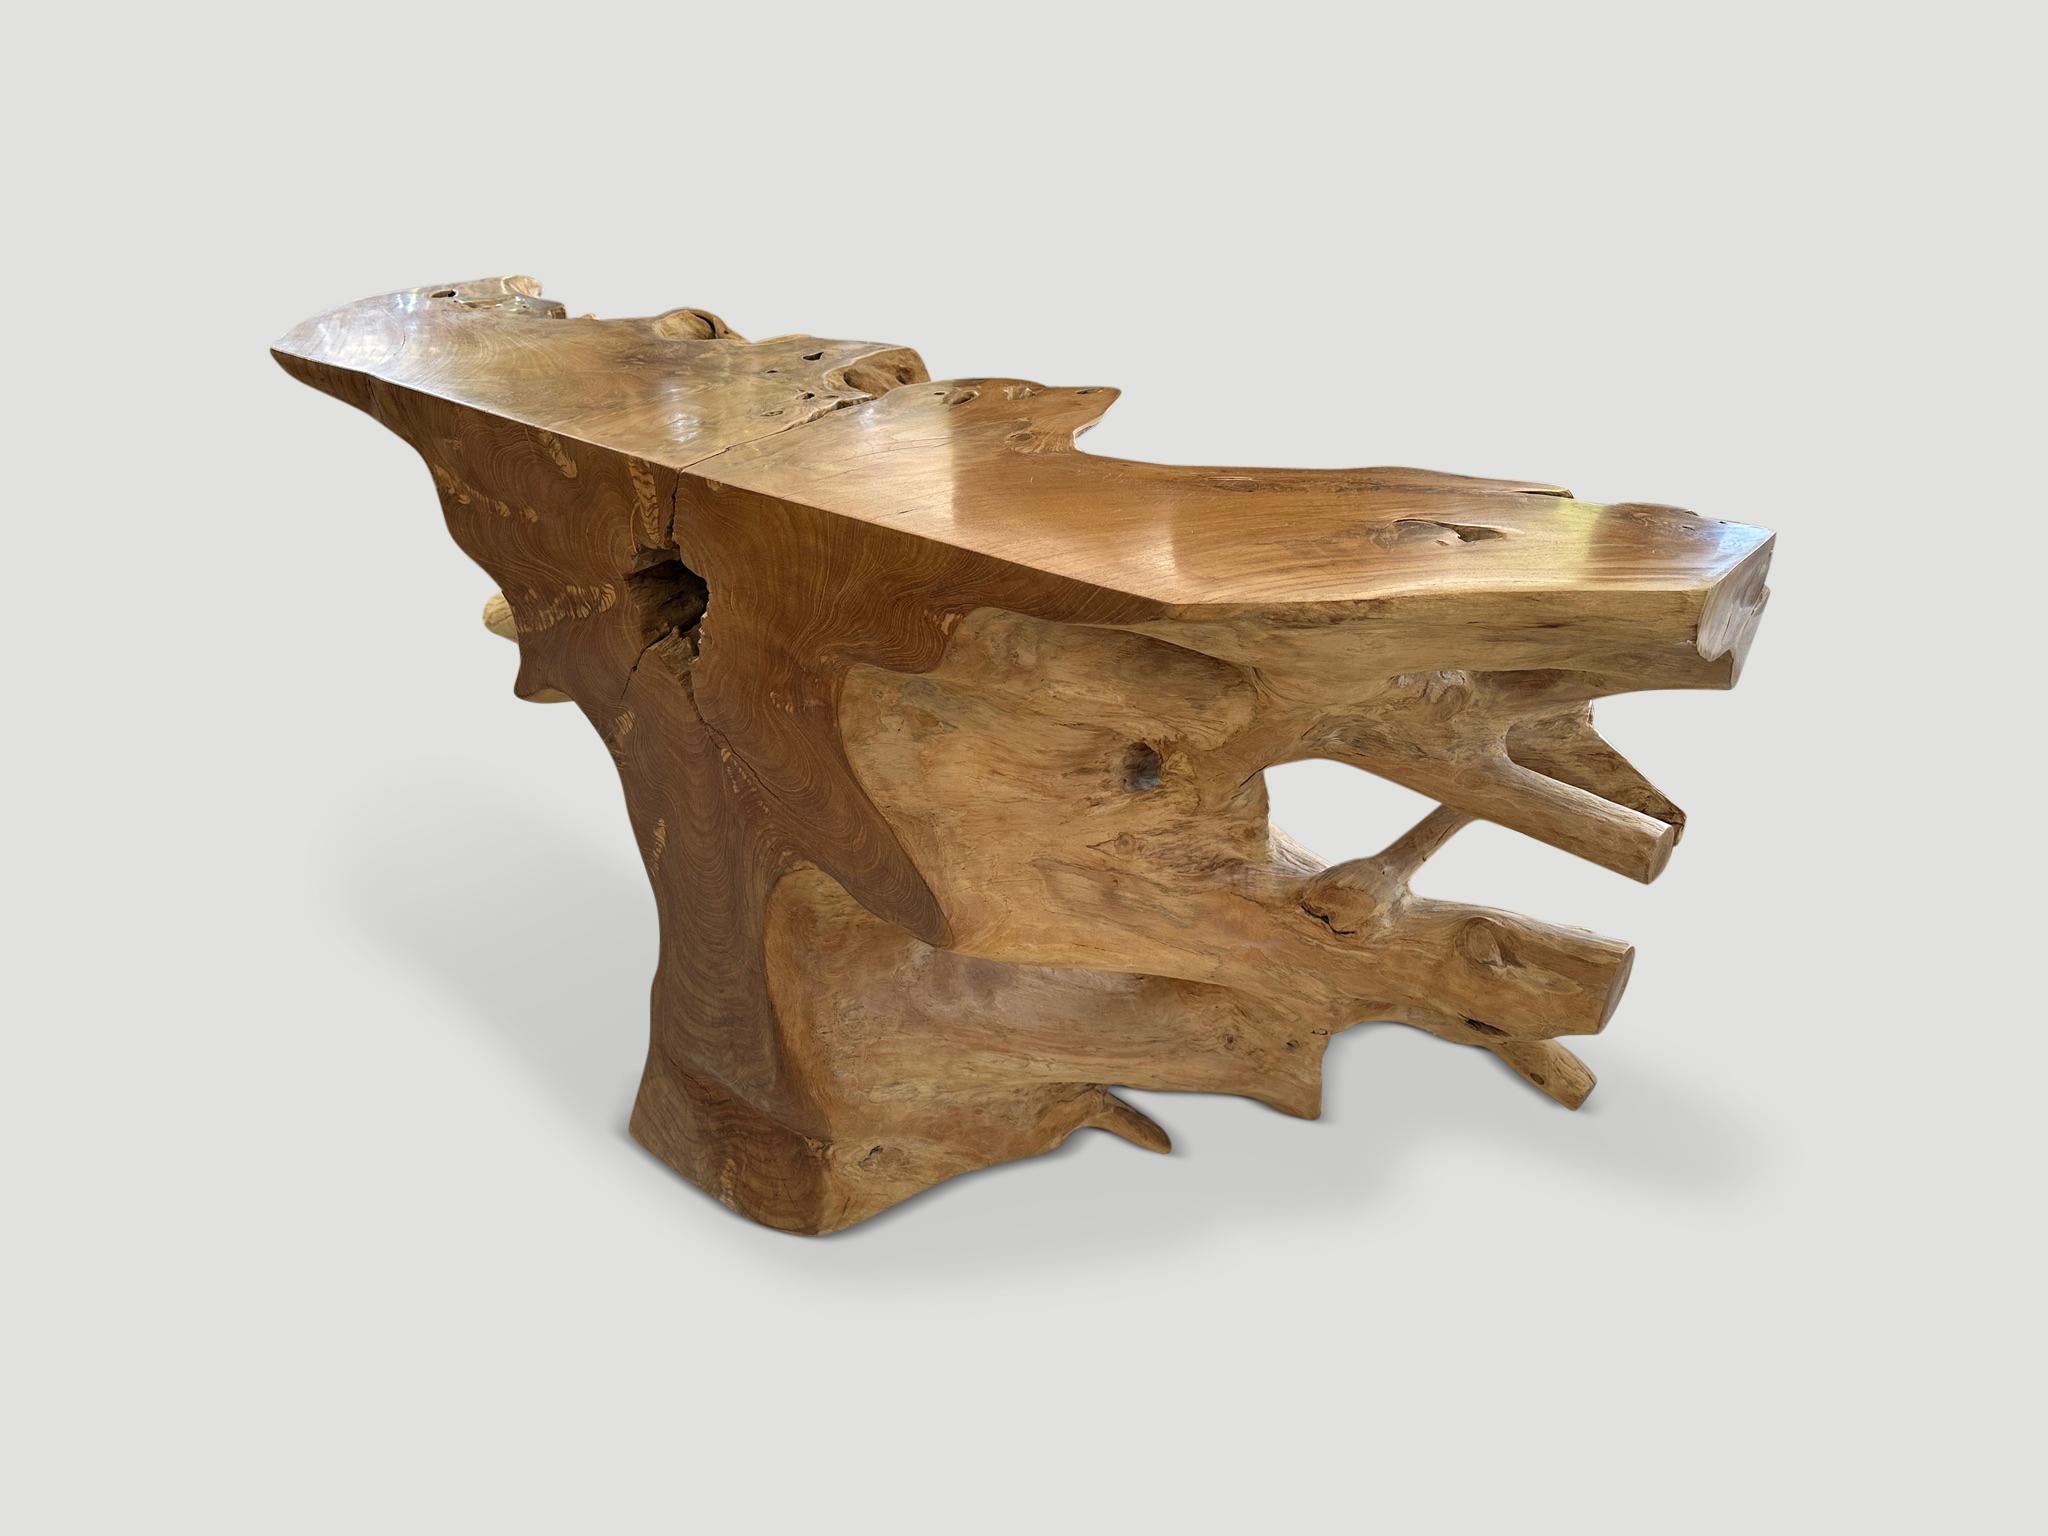 Stunningly beautiful sculptural console table hand carved from a single teak root. The flat surfaces have been polished with a natural oil revealing the beautiful wood grain. We left the more organic sections raw in contrast. It’s all in the